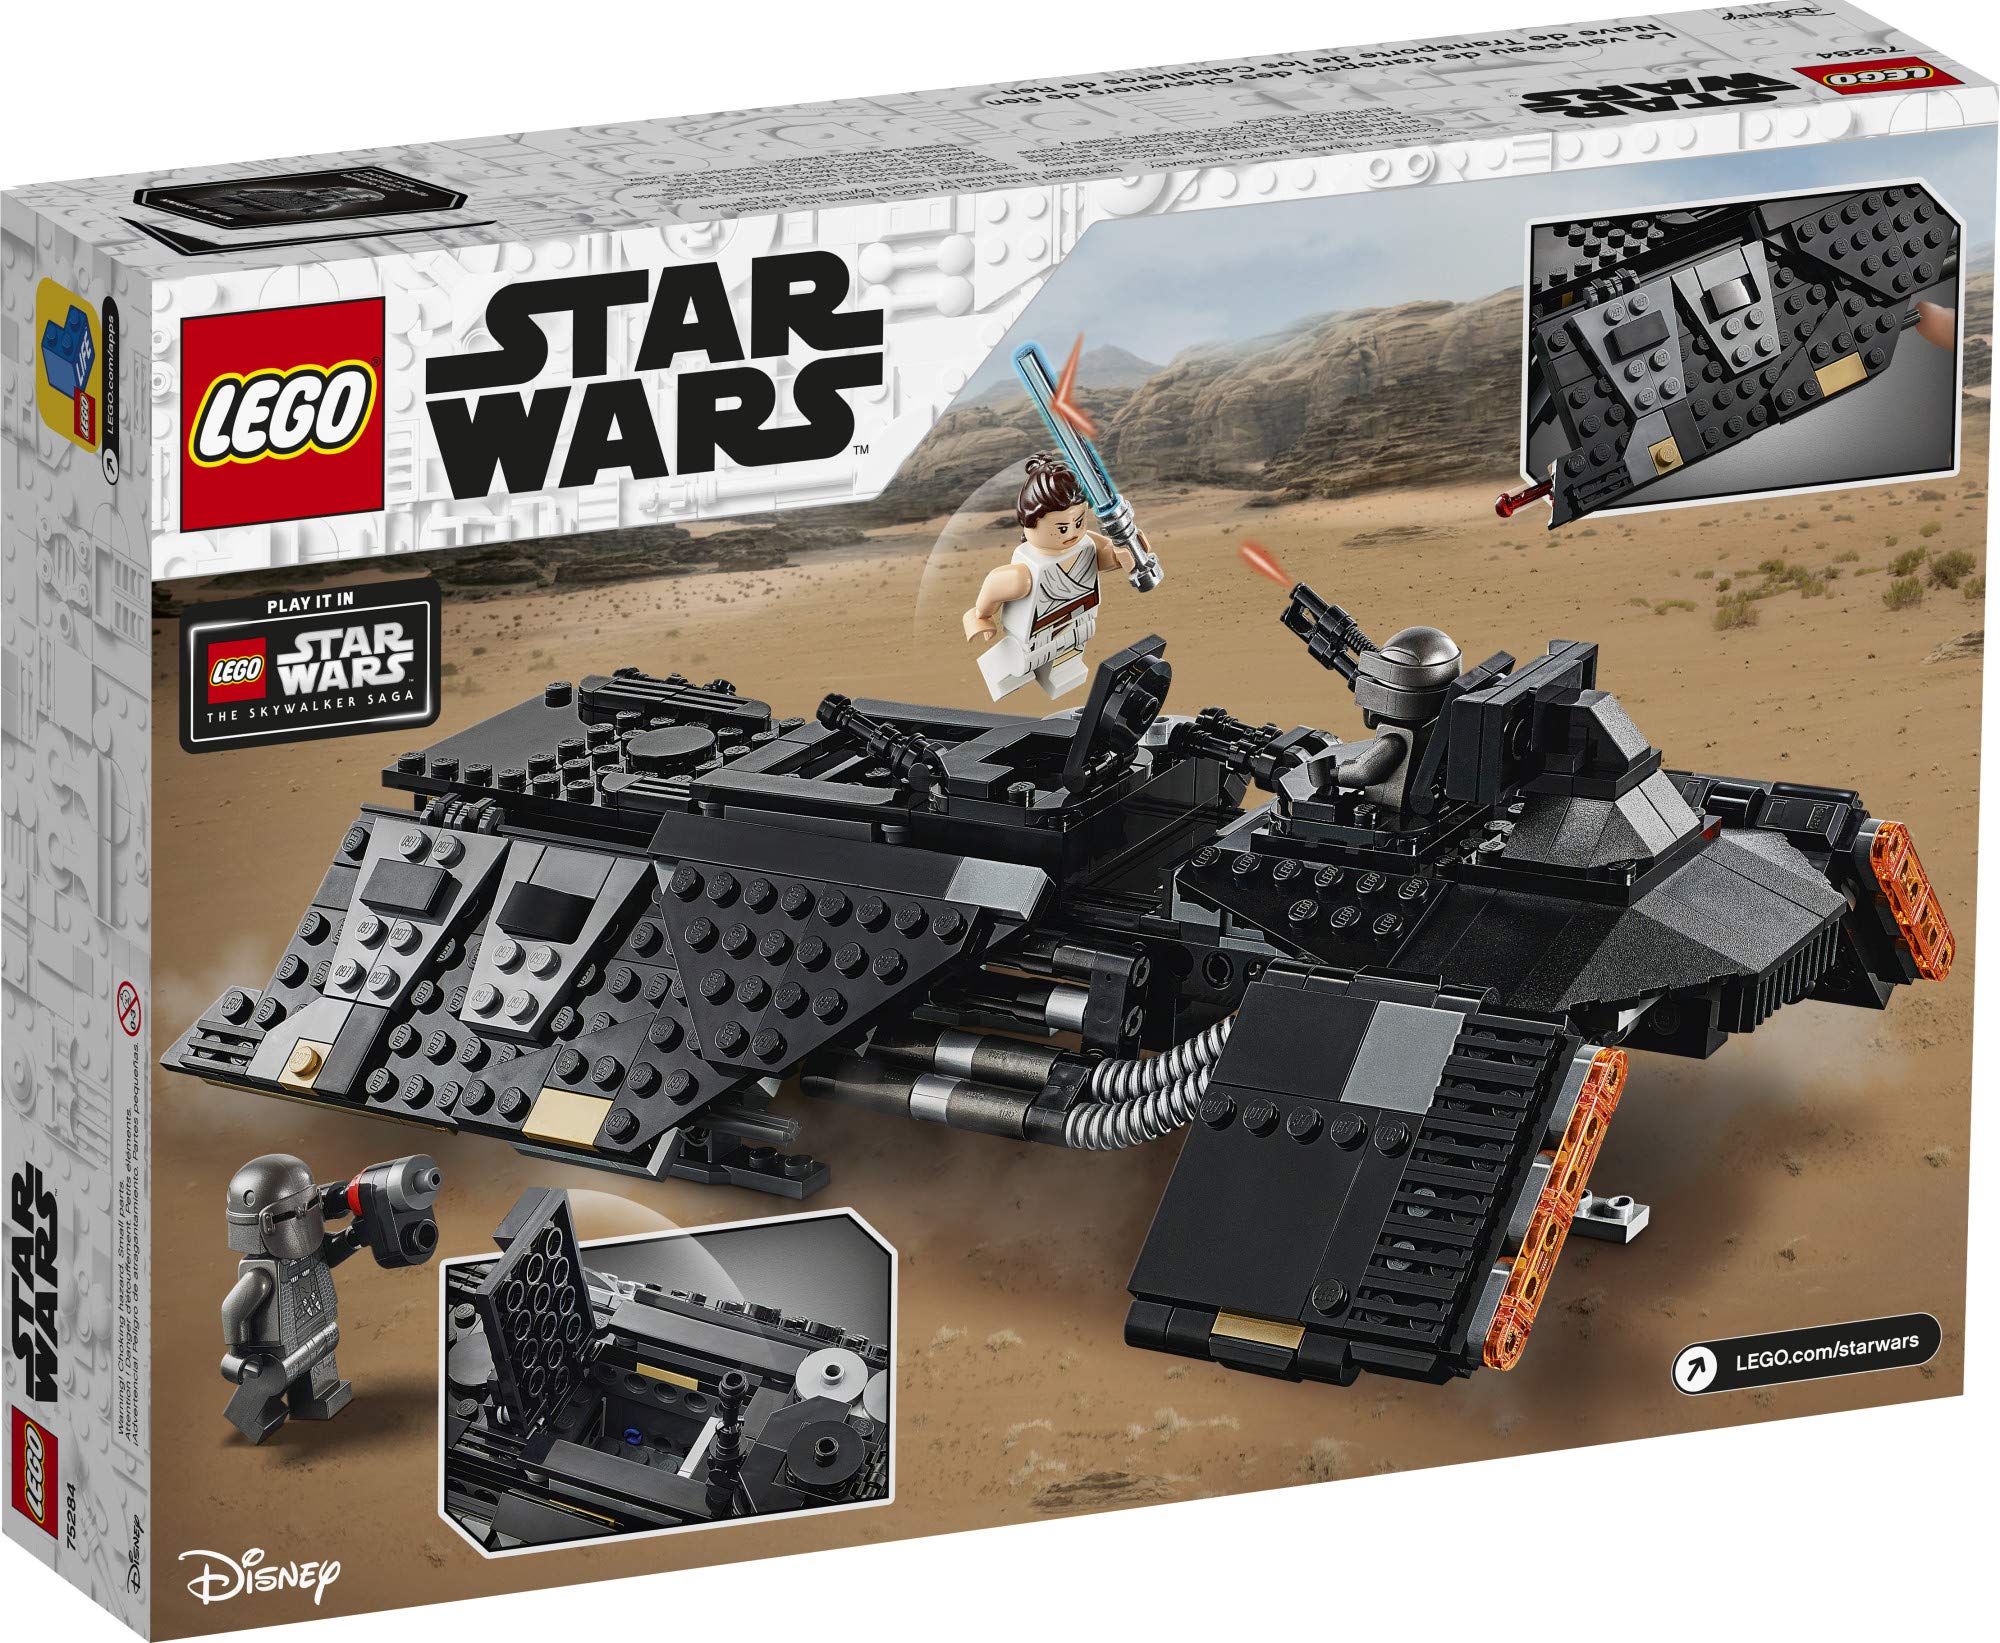 LEGO Star Wars: The Rise of Skywalker Knights of Ren Transport Ship 75284 Spacecraft Set, Features Knights of Ren and Rey Minifigures to Role-Play Star Wars Missions (595 Pieces)